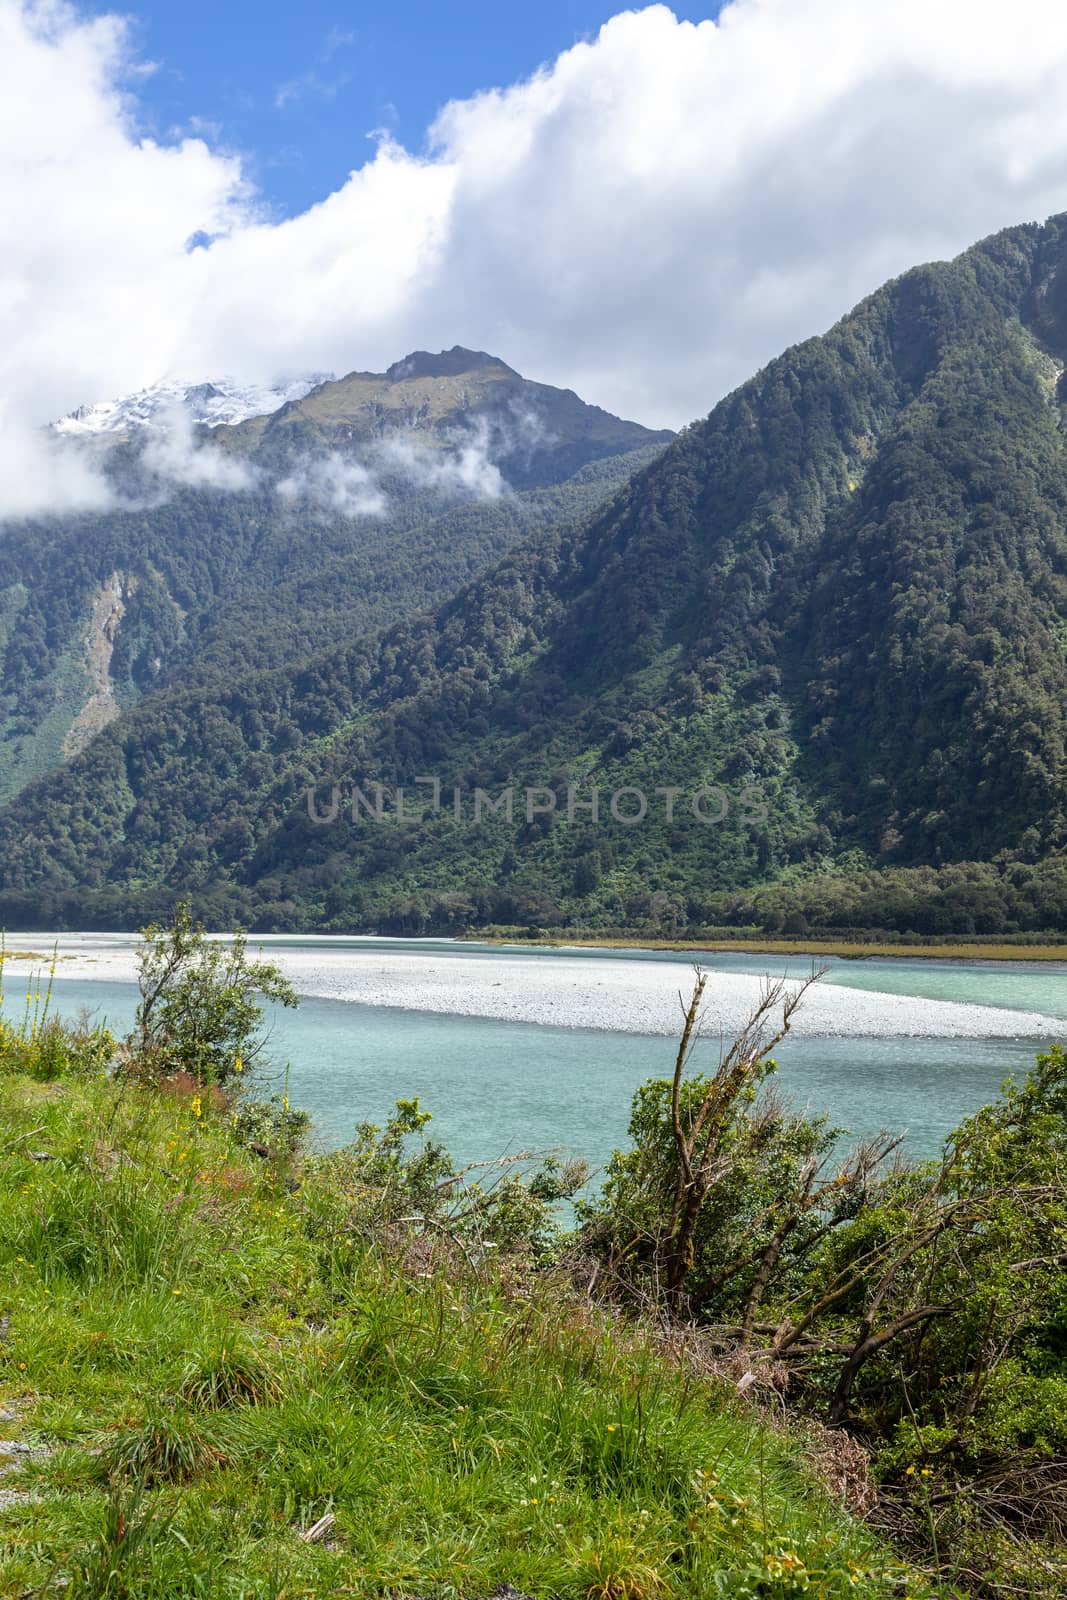 An image of a riverbed landscape scenery in south New Zealand